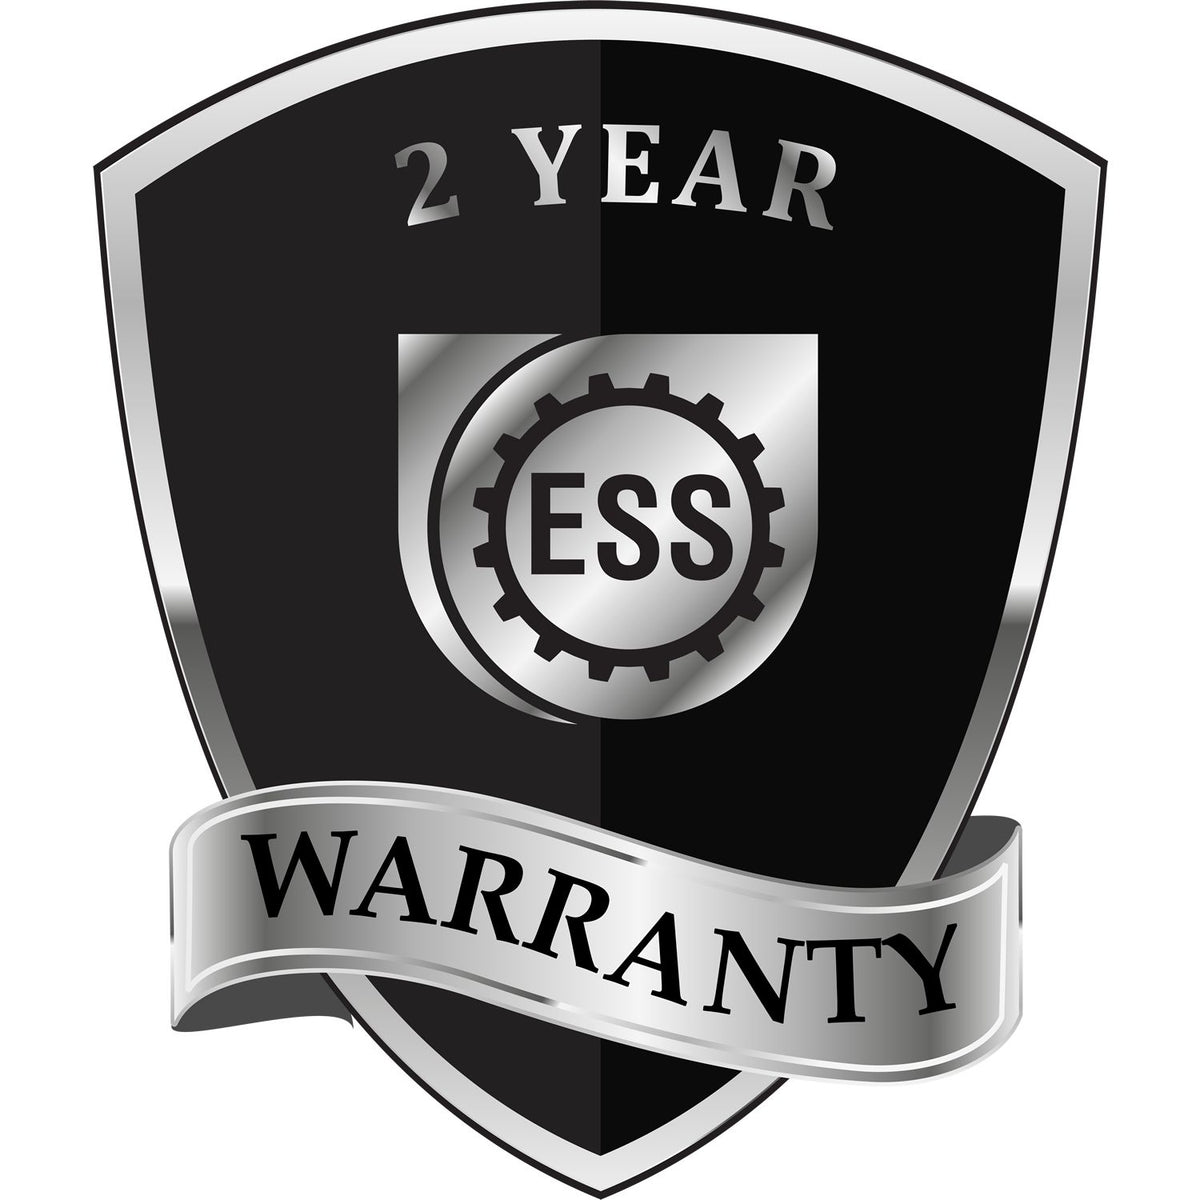 A black and silver badge or emblem showing warranty information for the Hybrid Texas Land Surveyor Seal